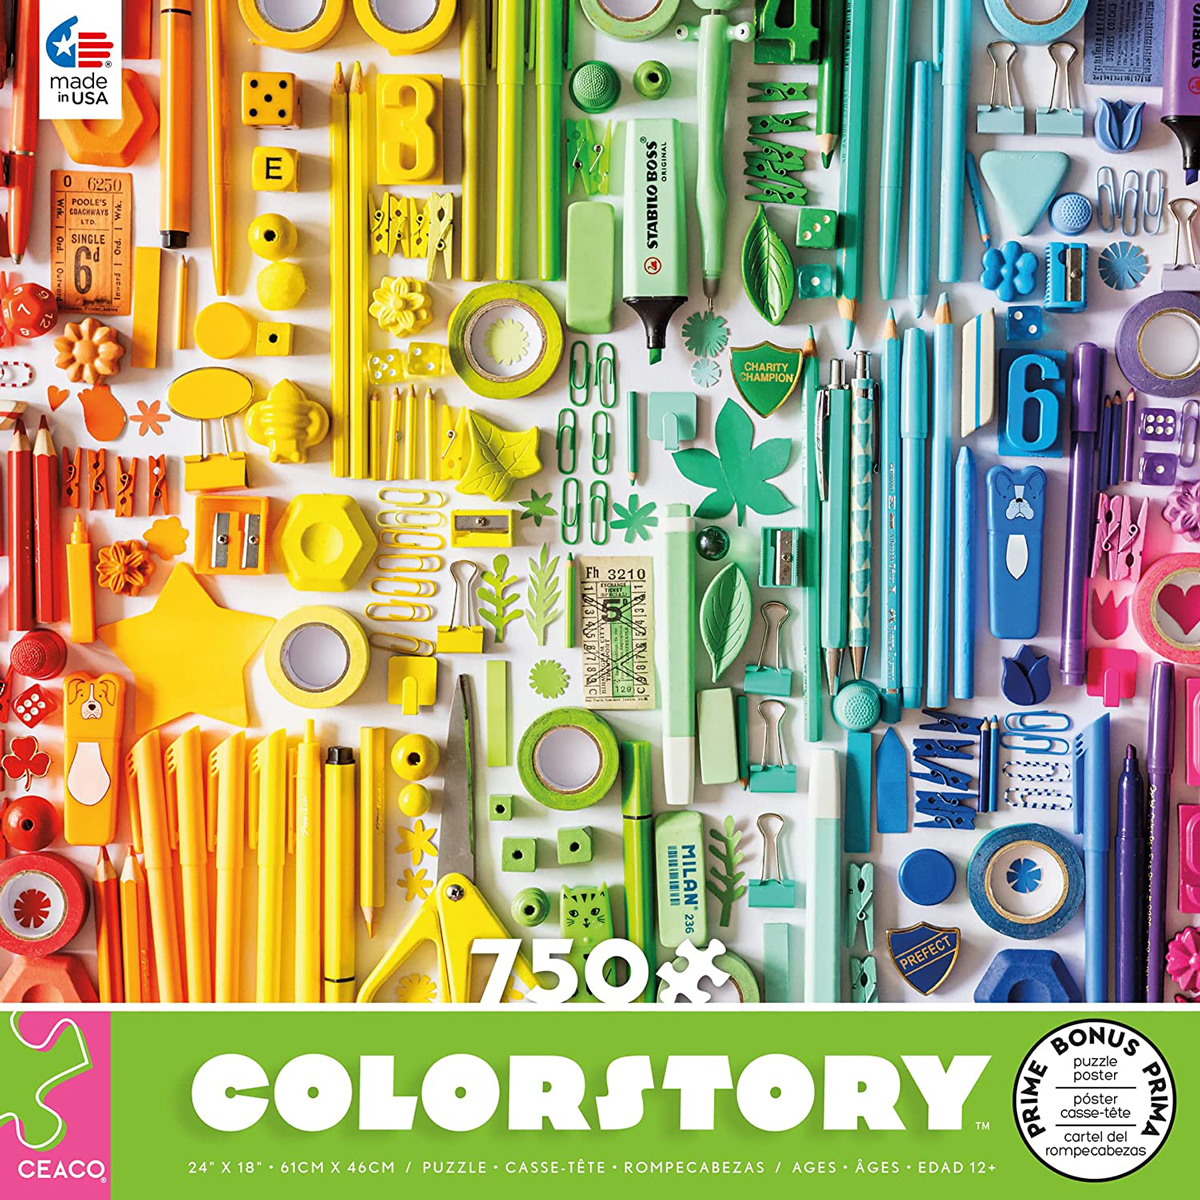 Colorstory - Stationary - Scratch and Dent